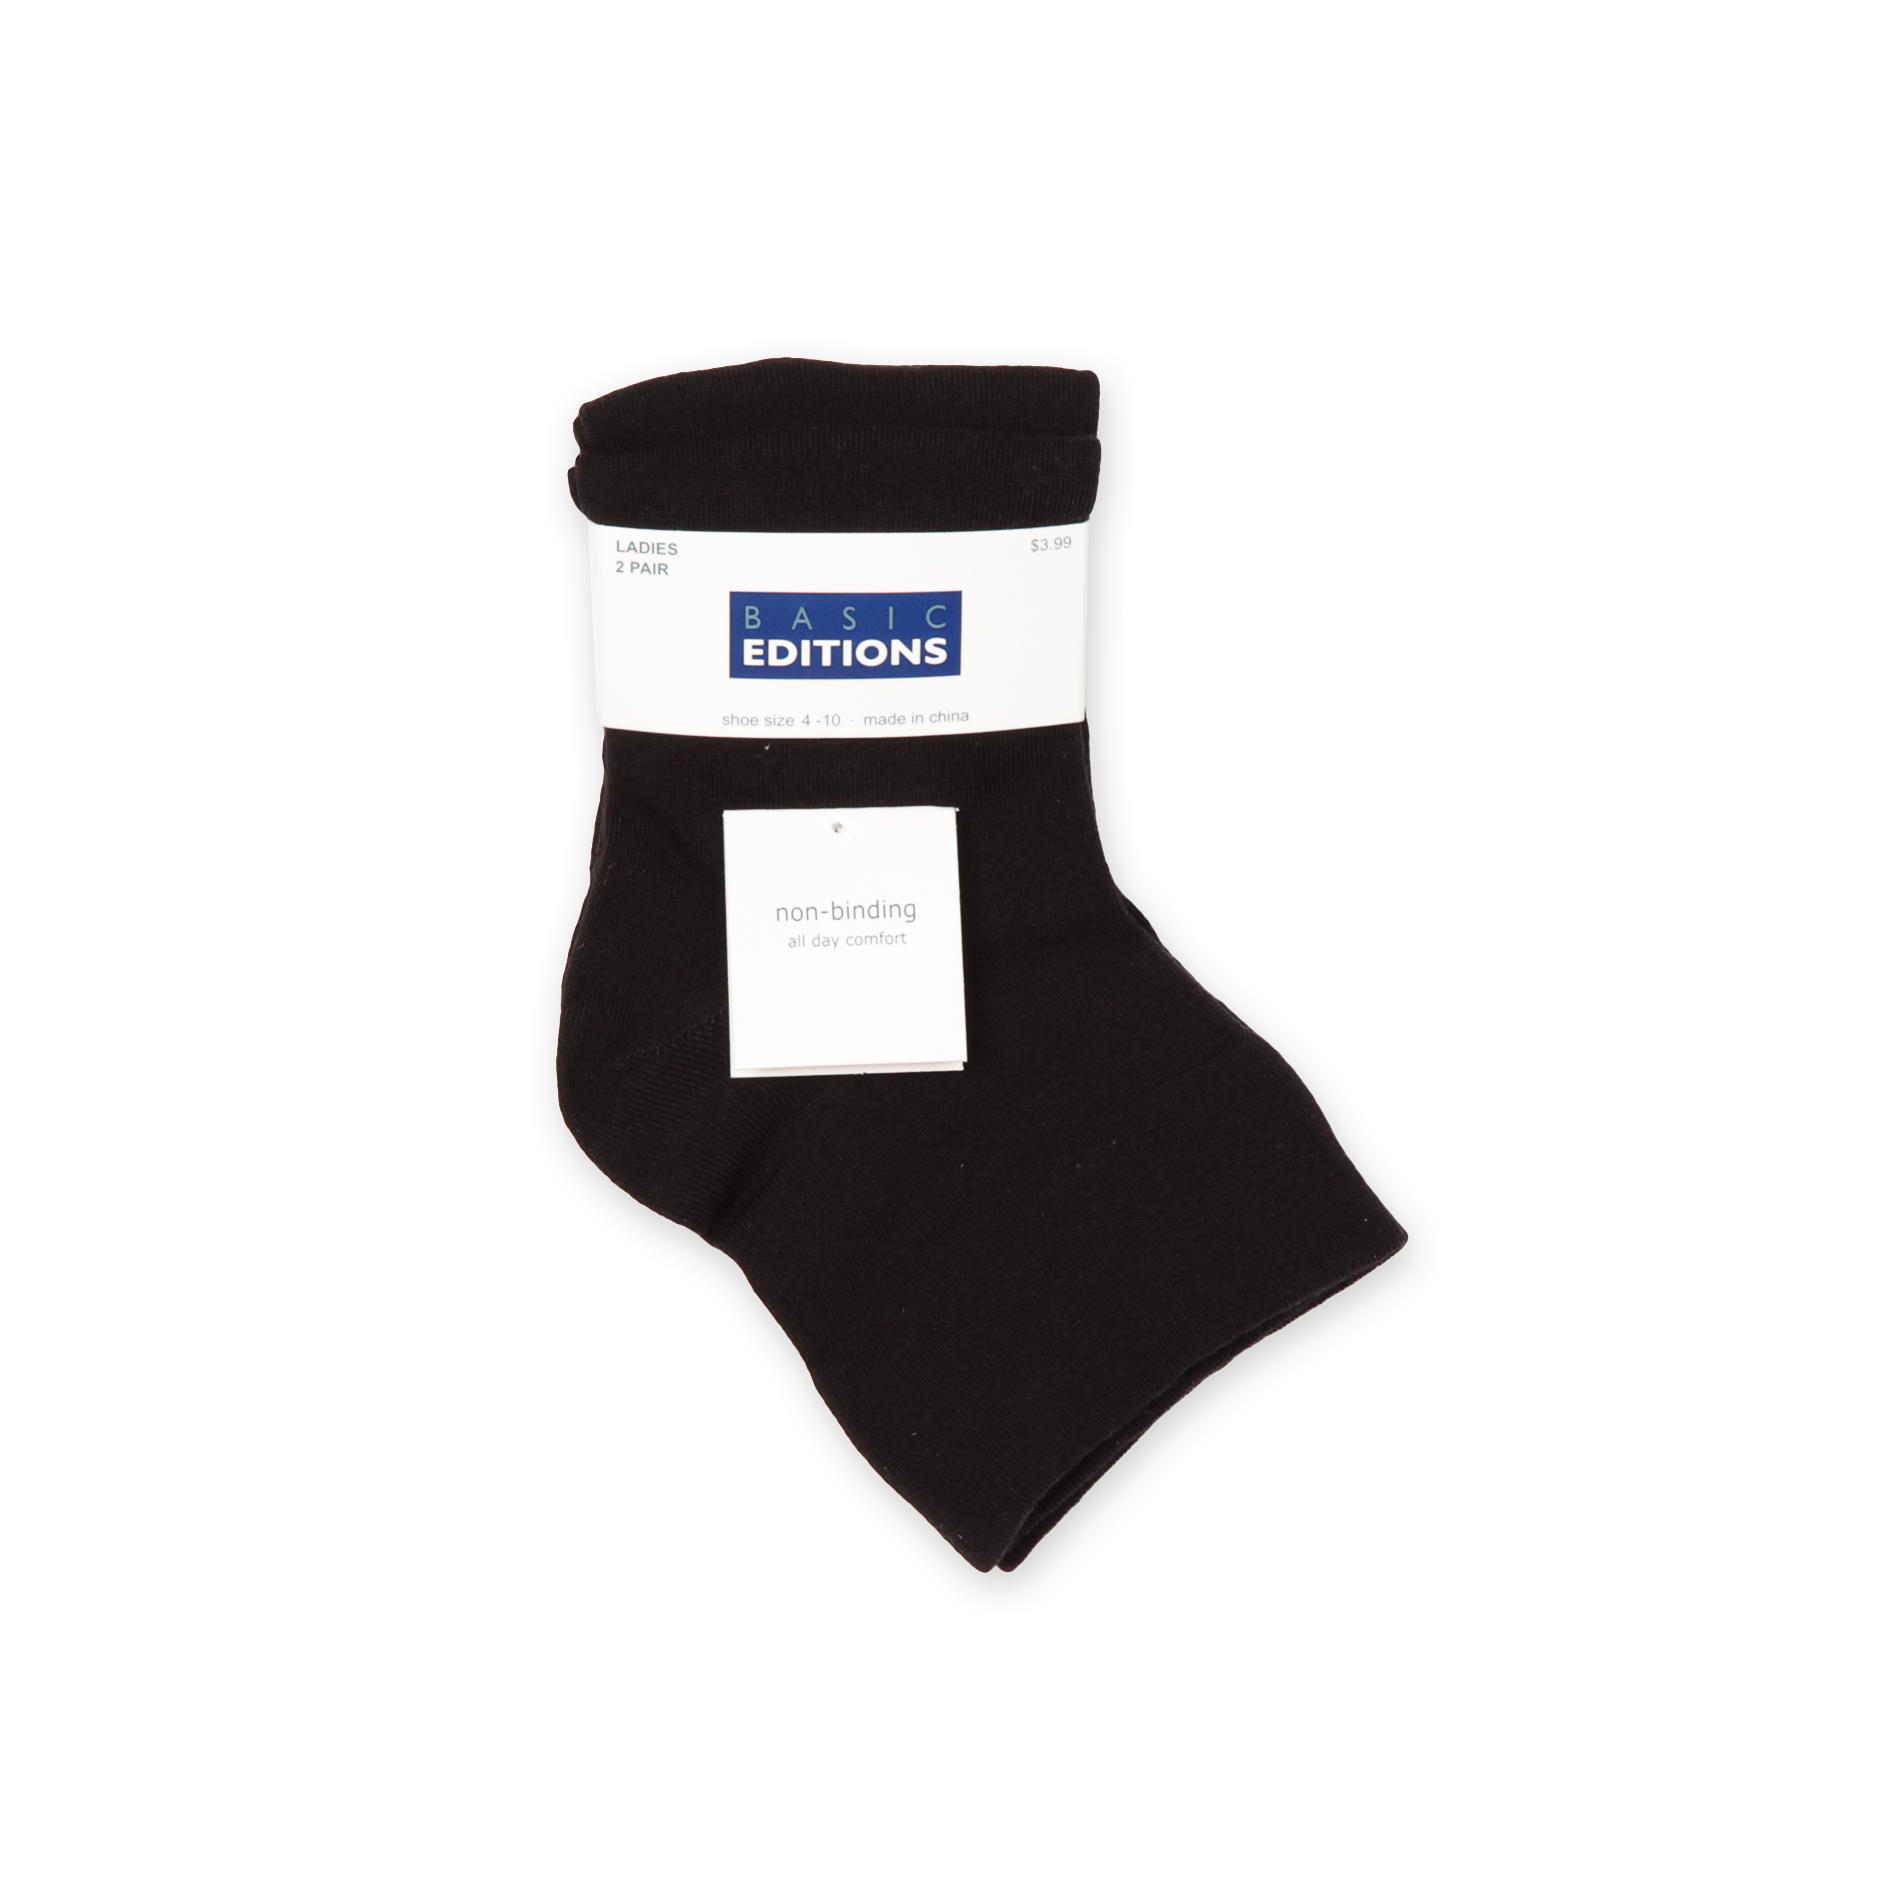 Basic Editions Women's 2-Pairs Wide Top Socks - Non-Binding